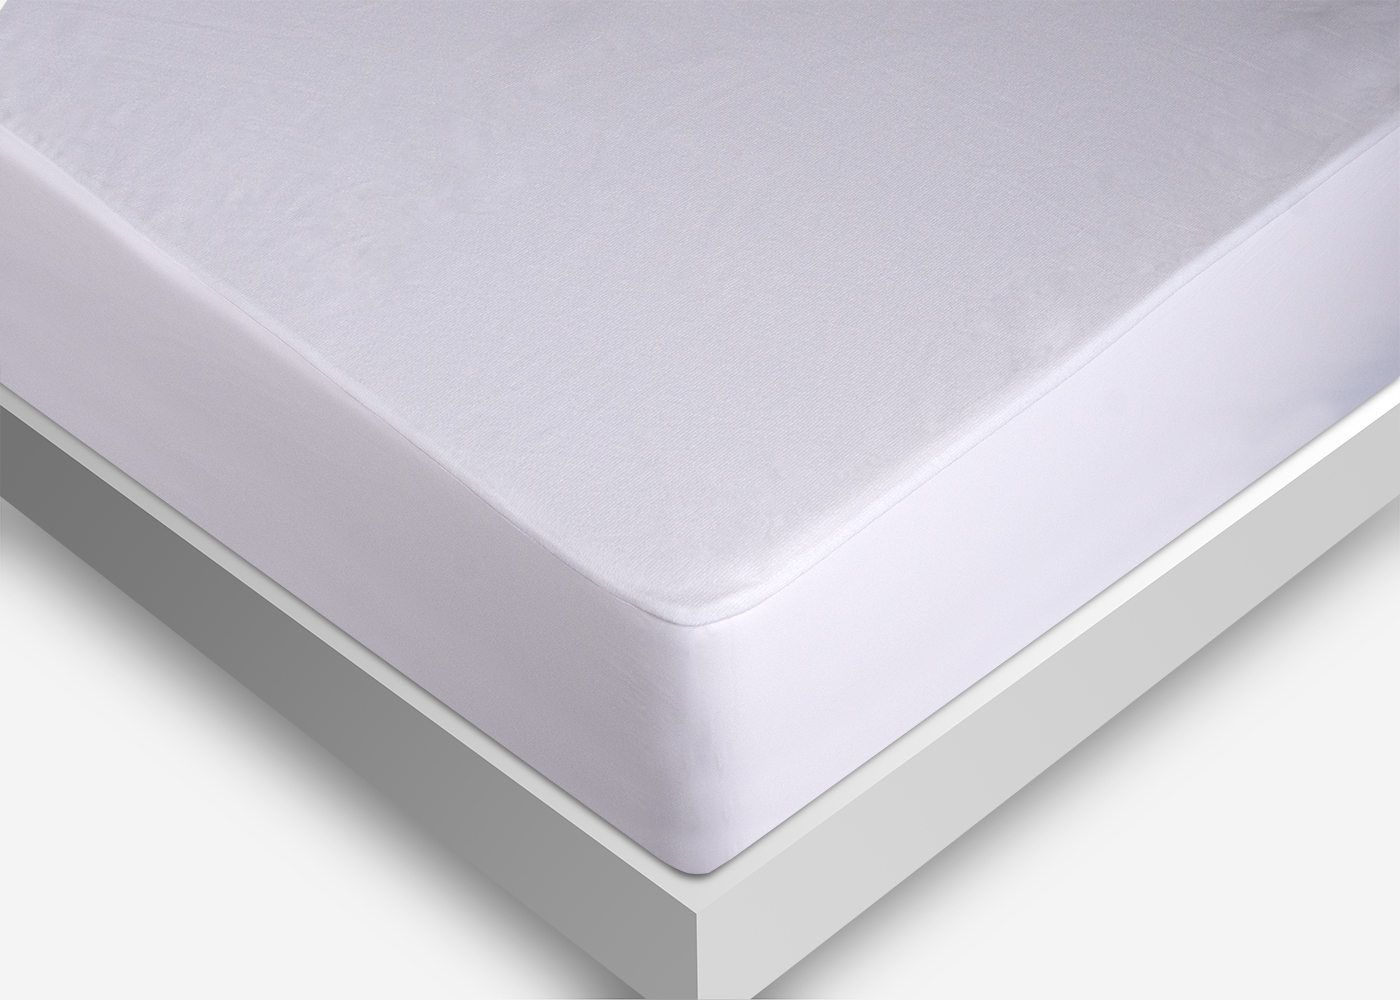 Brand New!!! Details about   iProtect Mattress Protector Queen size 